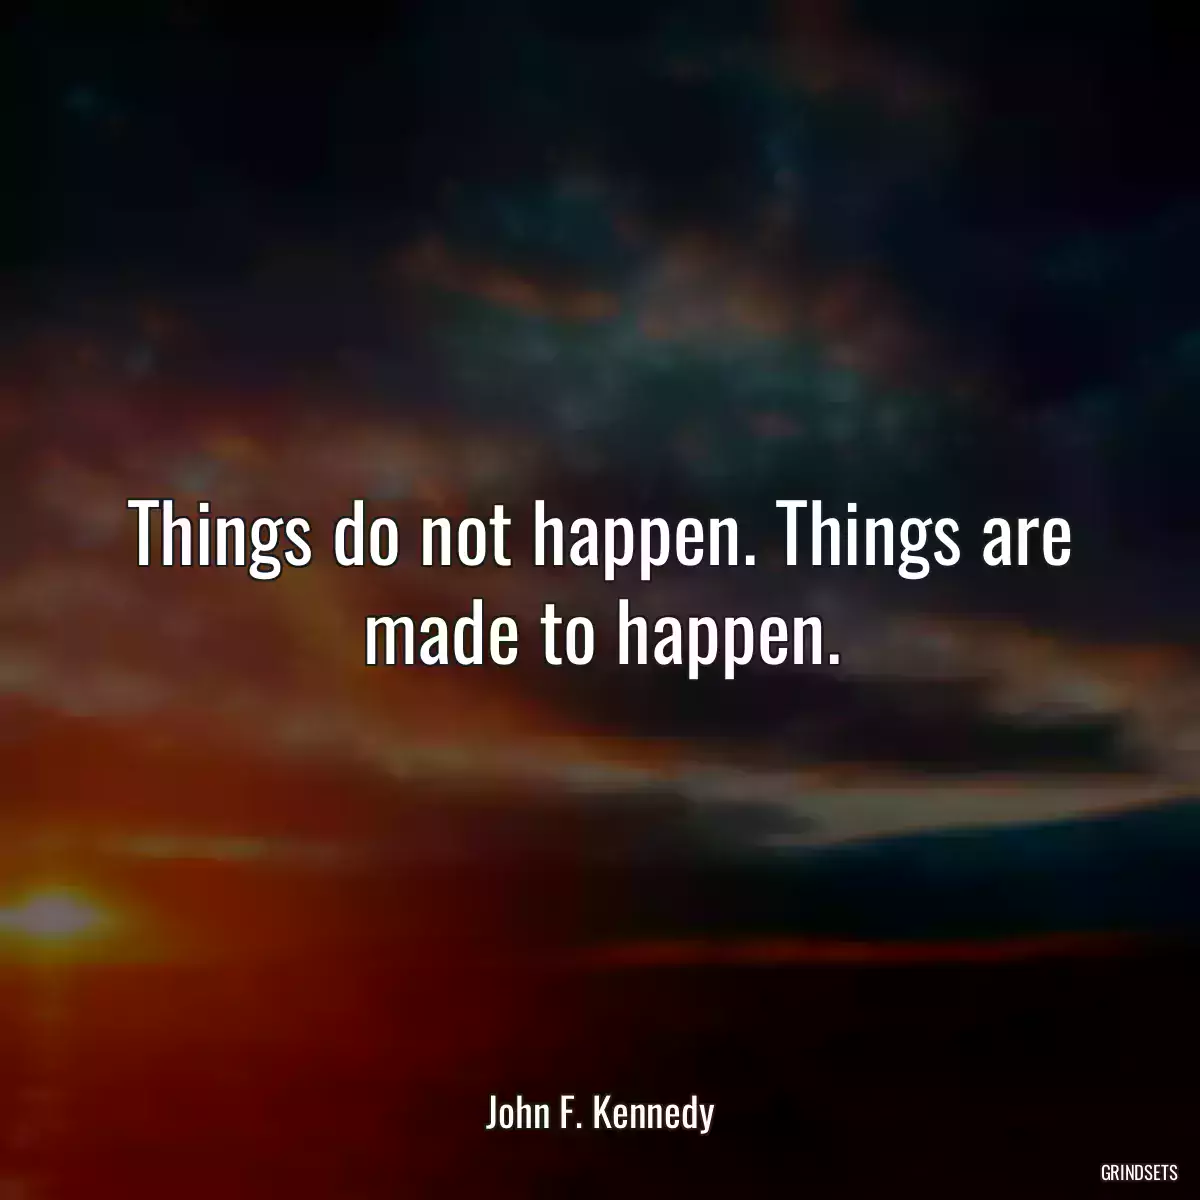 Things do not happen. Things are made to happen.